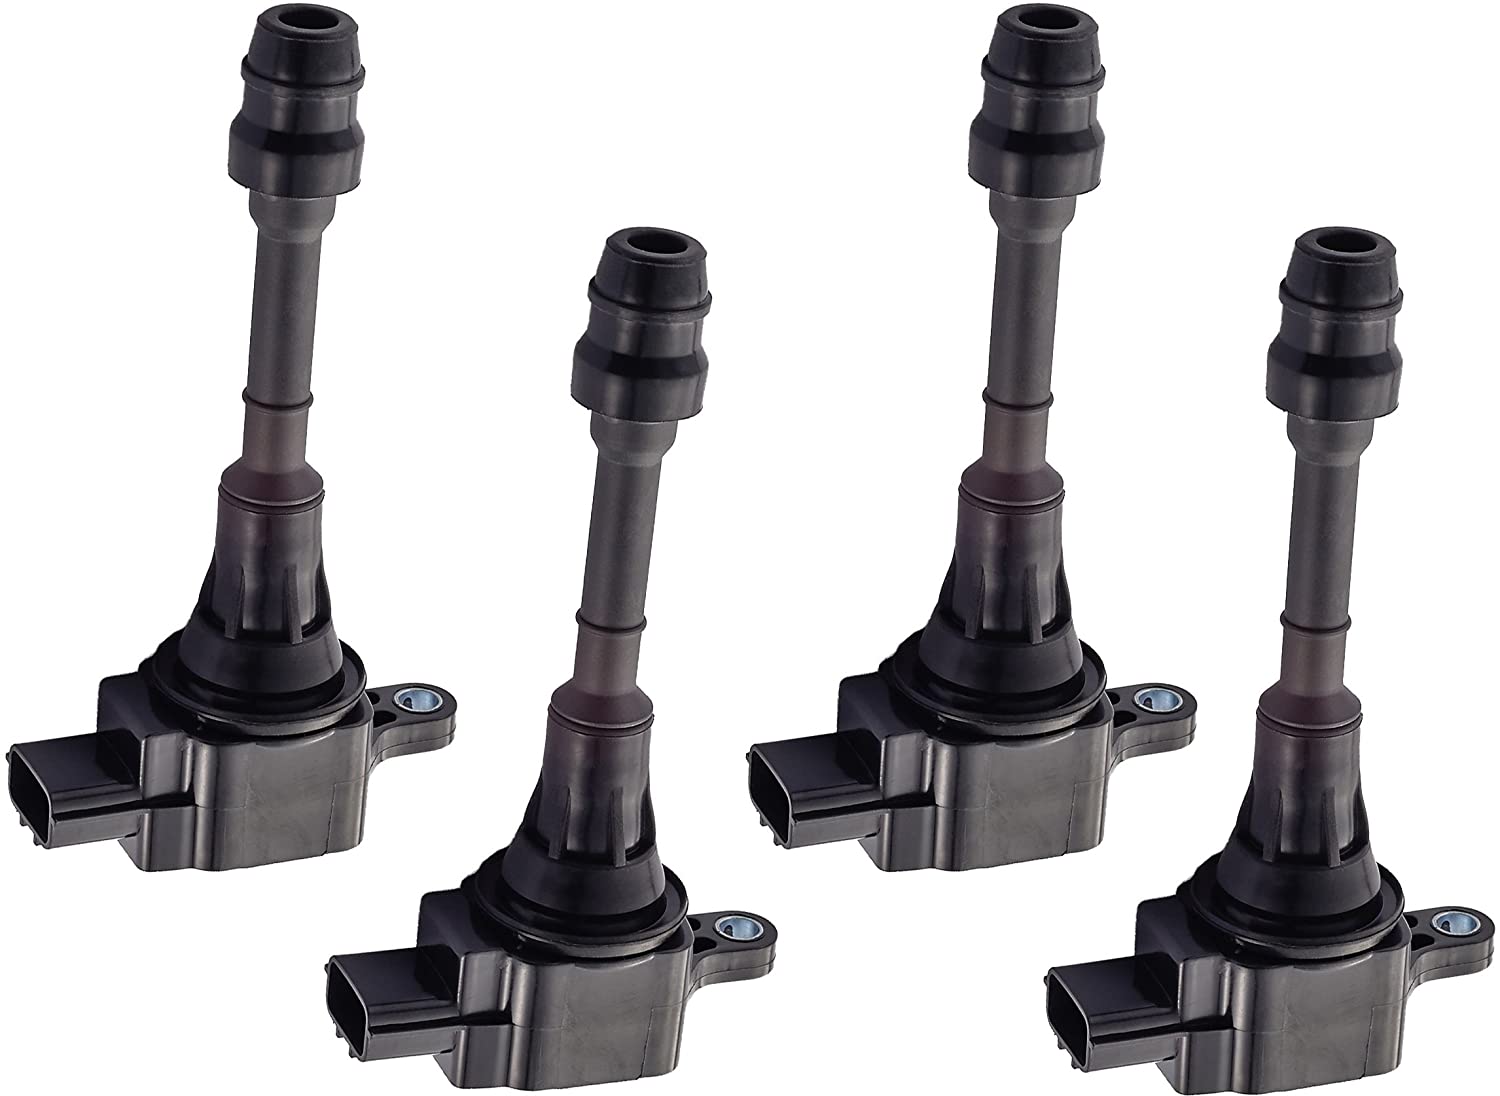 ENA Pack of 4 Ignition Coils Compatible with 2002-2008 Nissan Altima Sentra X-Trail - 2.5L - UF350 22448-8H315 22448-8H310 C1398 UF-350